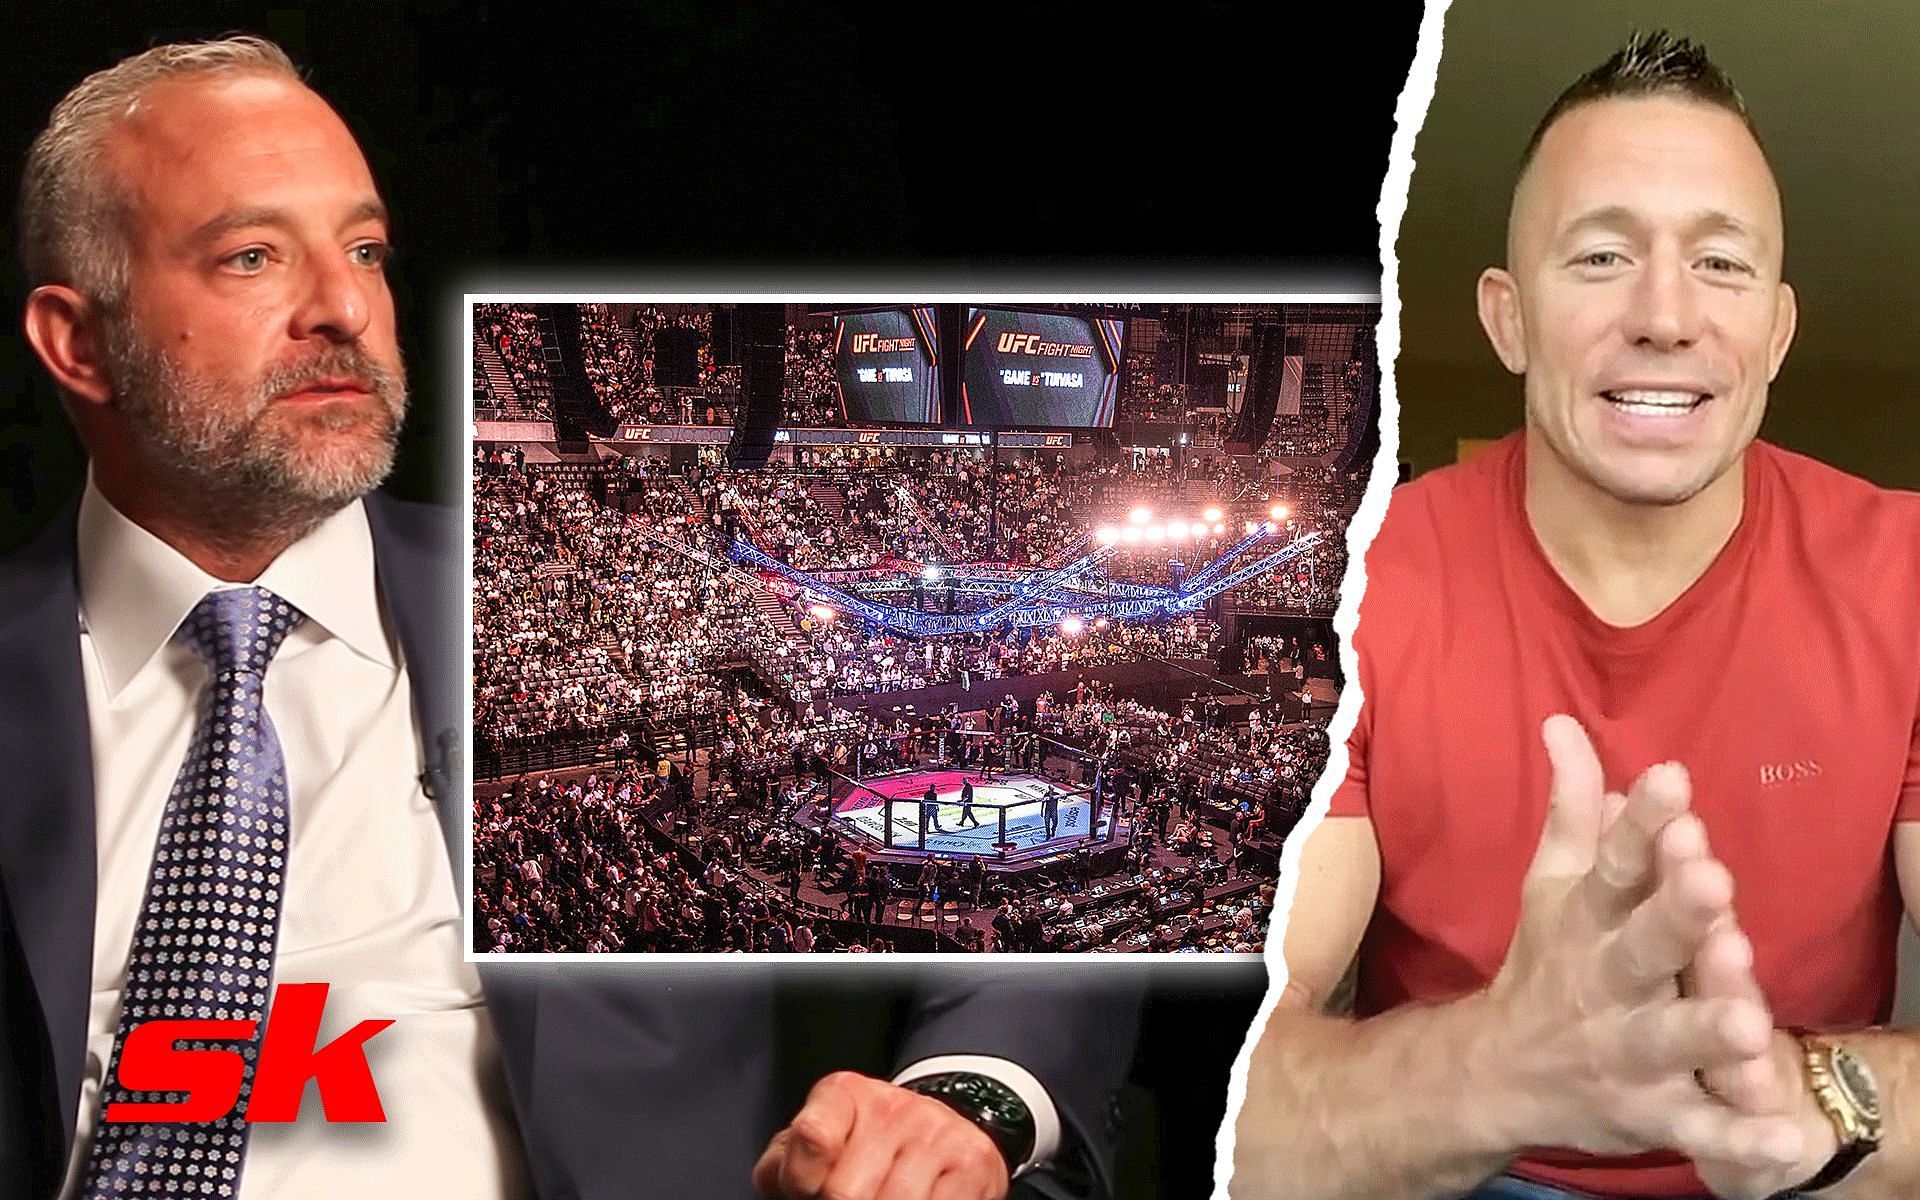 Lorenze Fertitta and Georges St-Pierre [Image credits:Lorenzo from Graham Bensinger YouTube, center image from @ufc on Twitter, GSP from @georgesstpierre from Instagram]